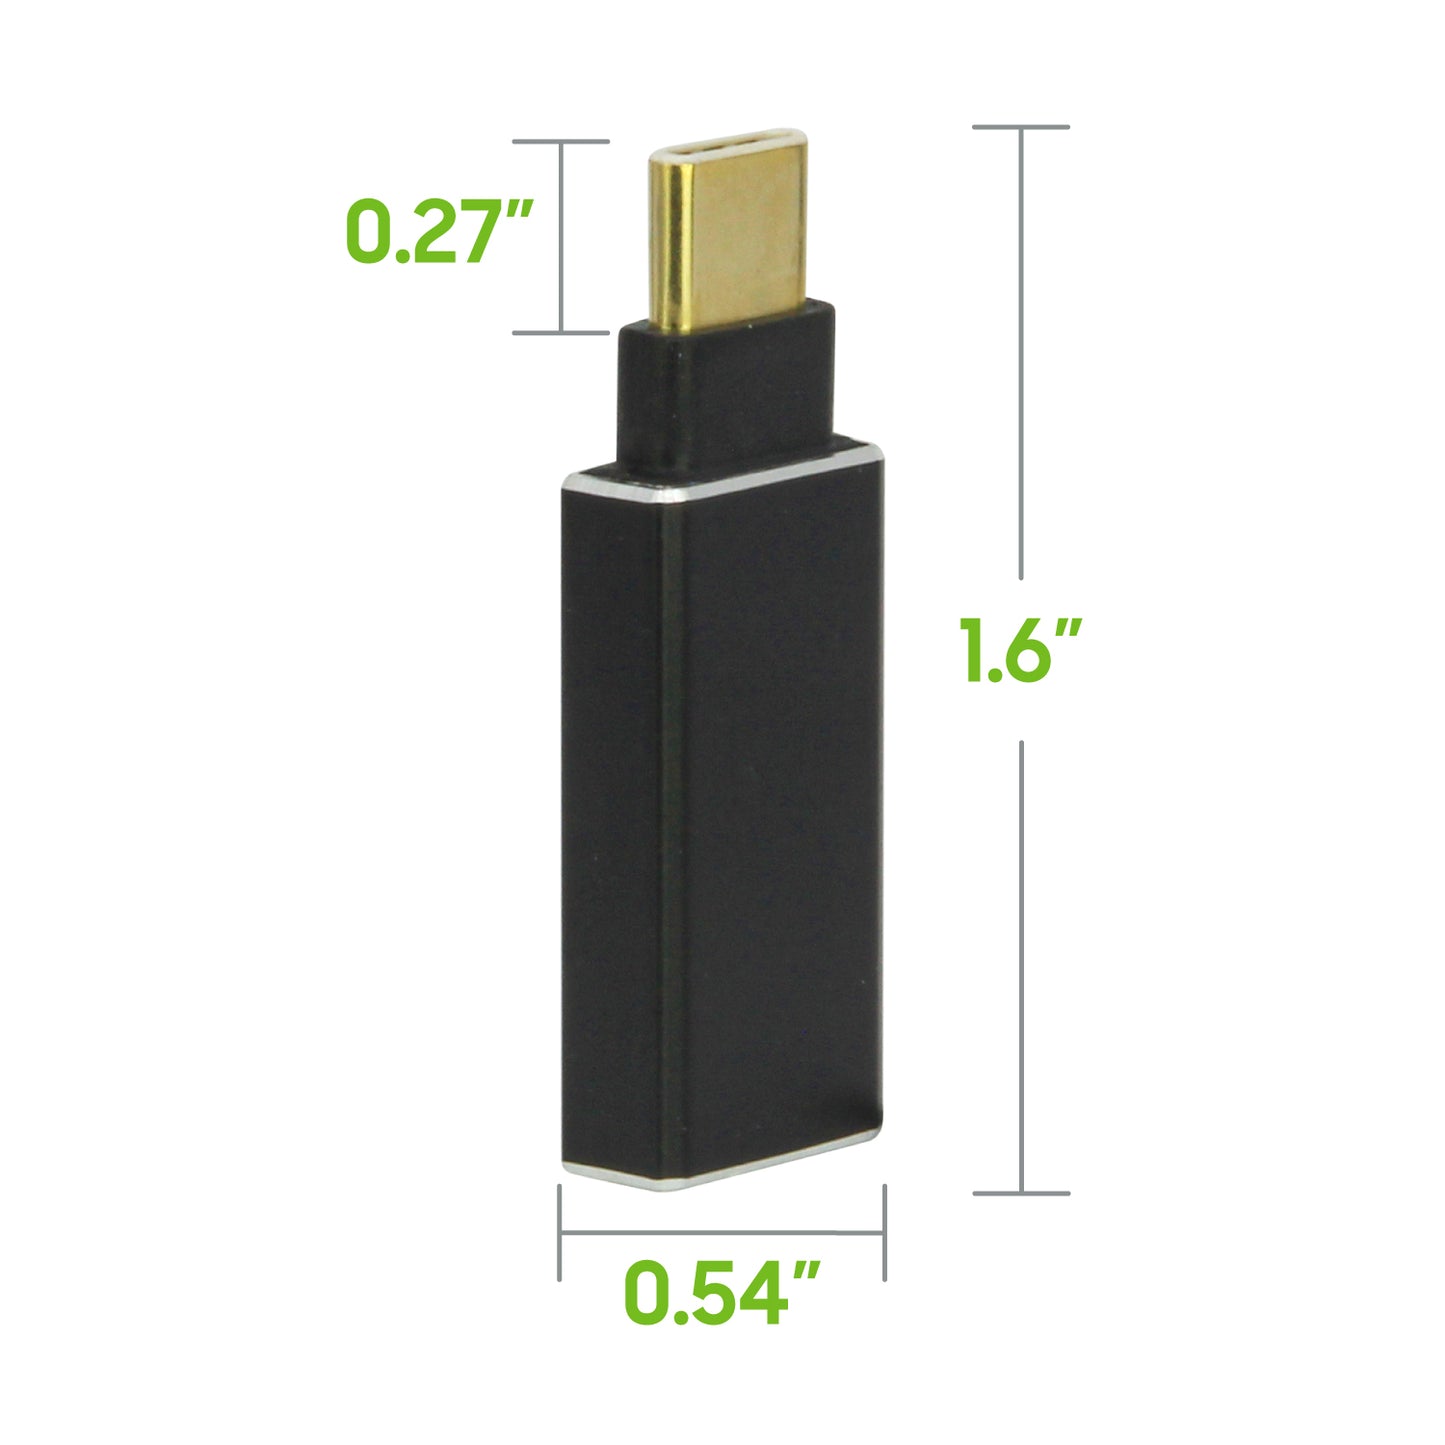 CNUSBC - CELLET USB3.0 A to Type C ADAPTER